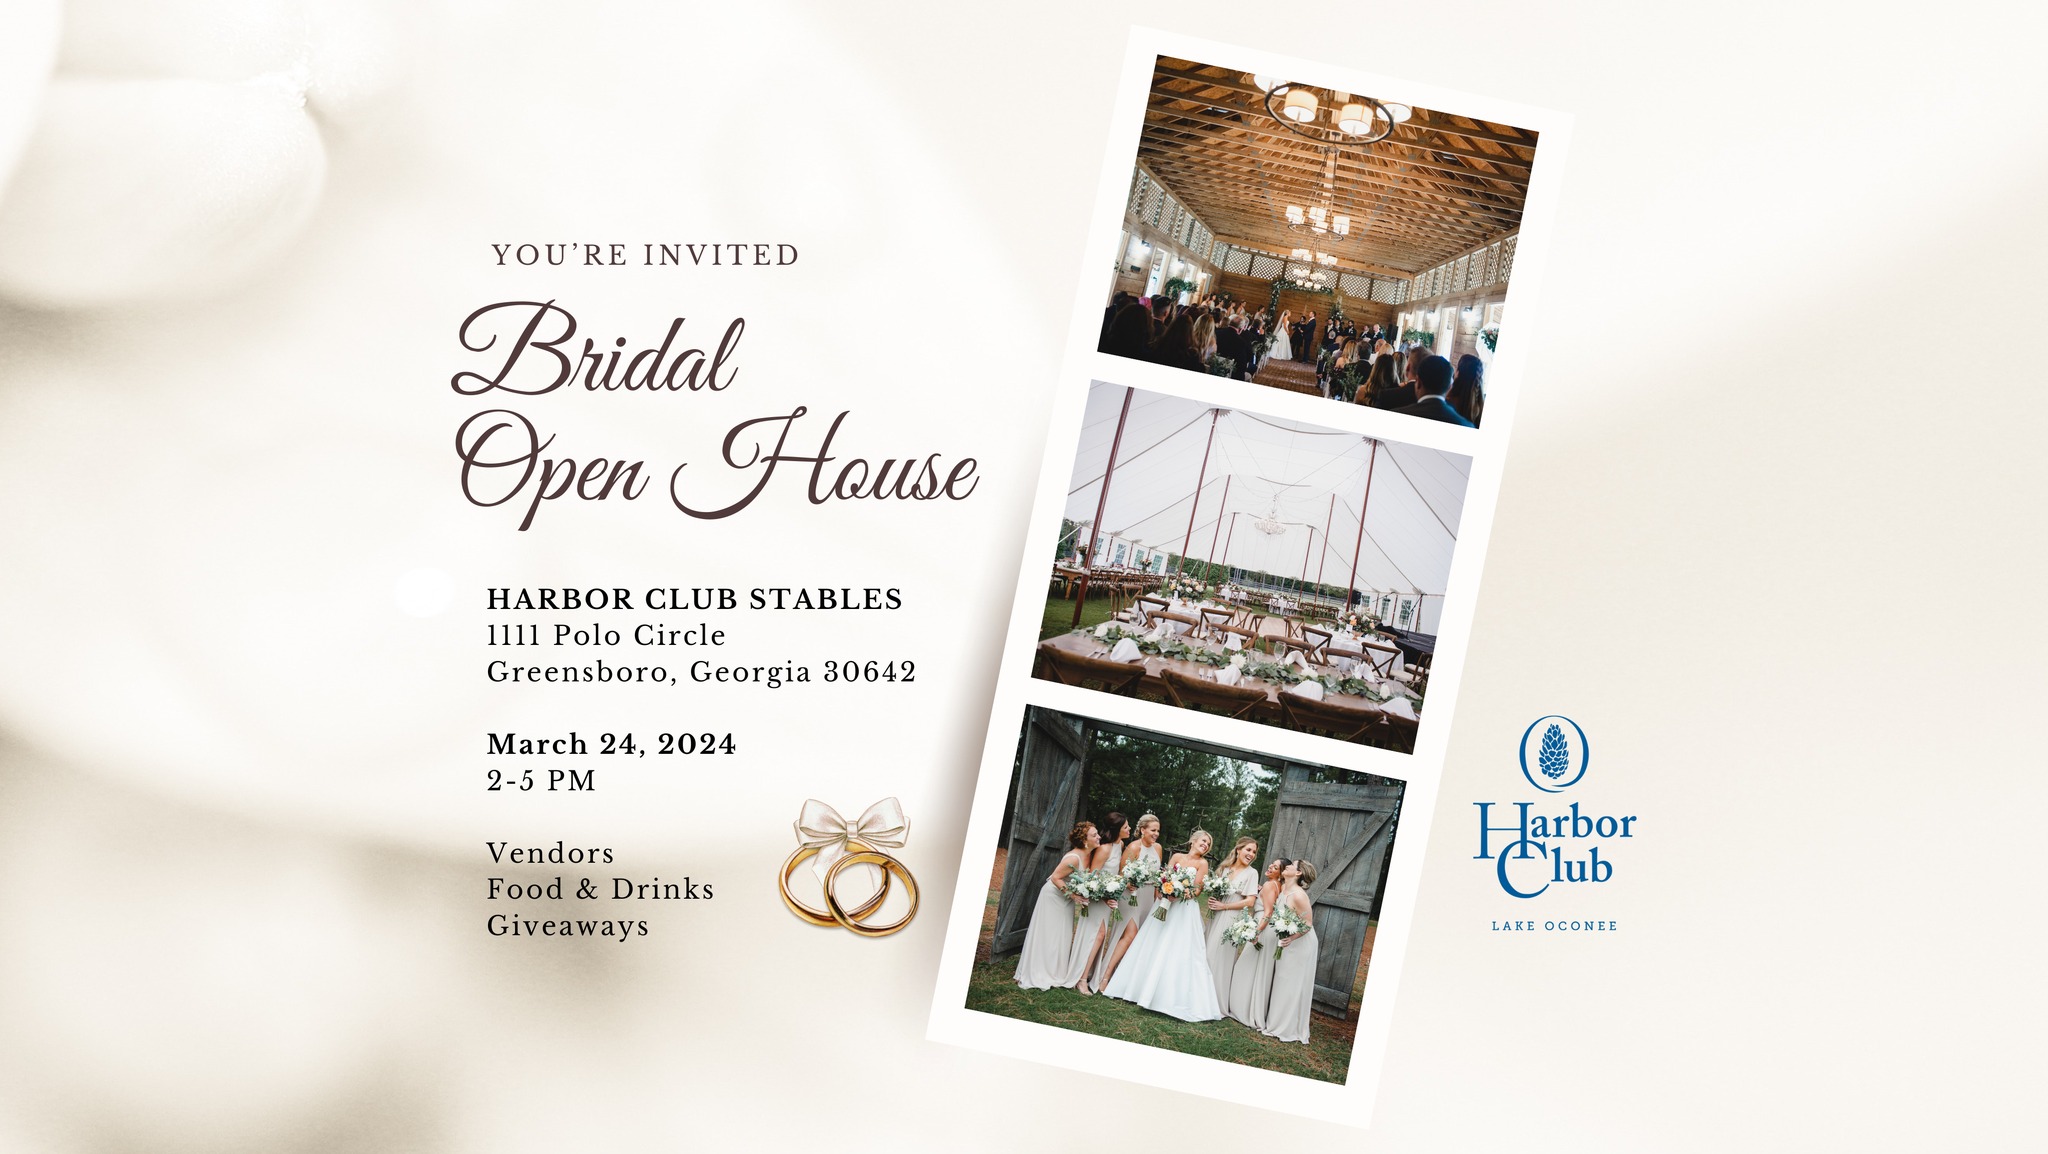 Bridal Event at the stables at harbor club